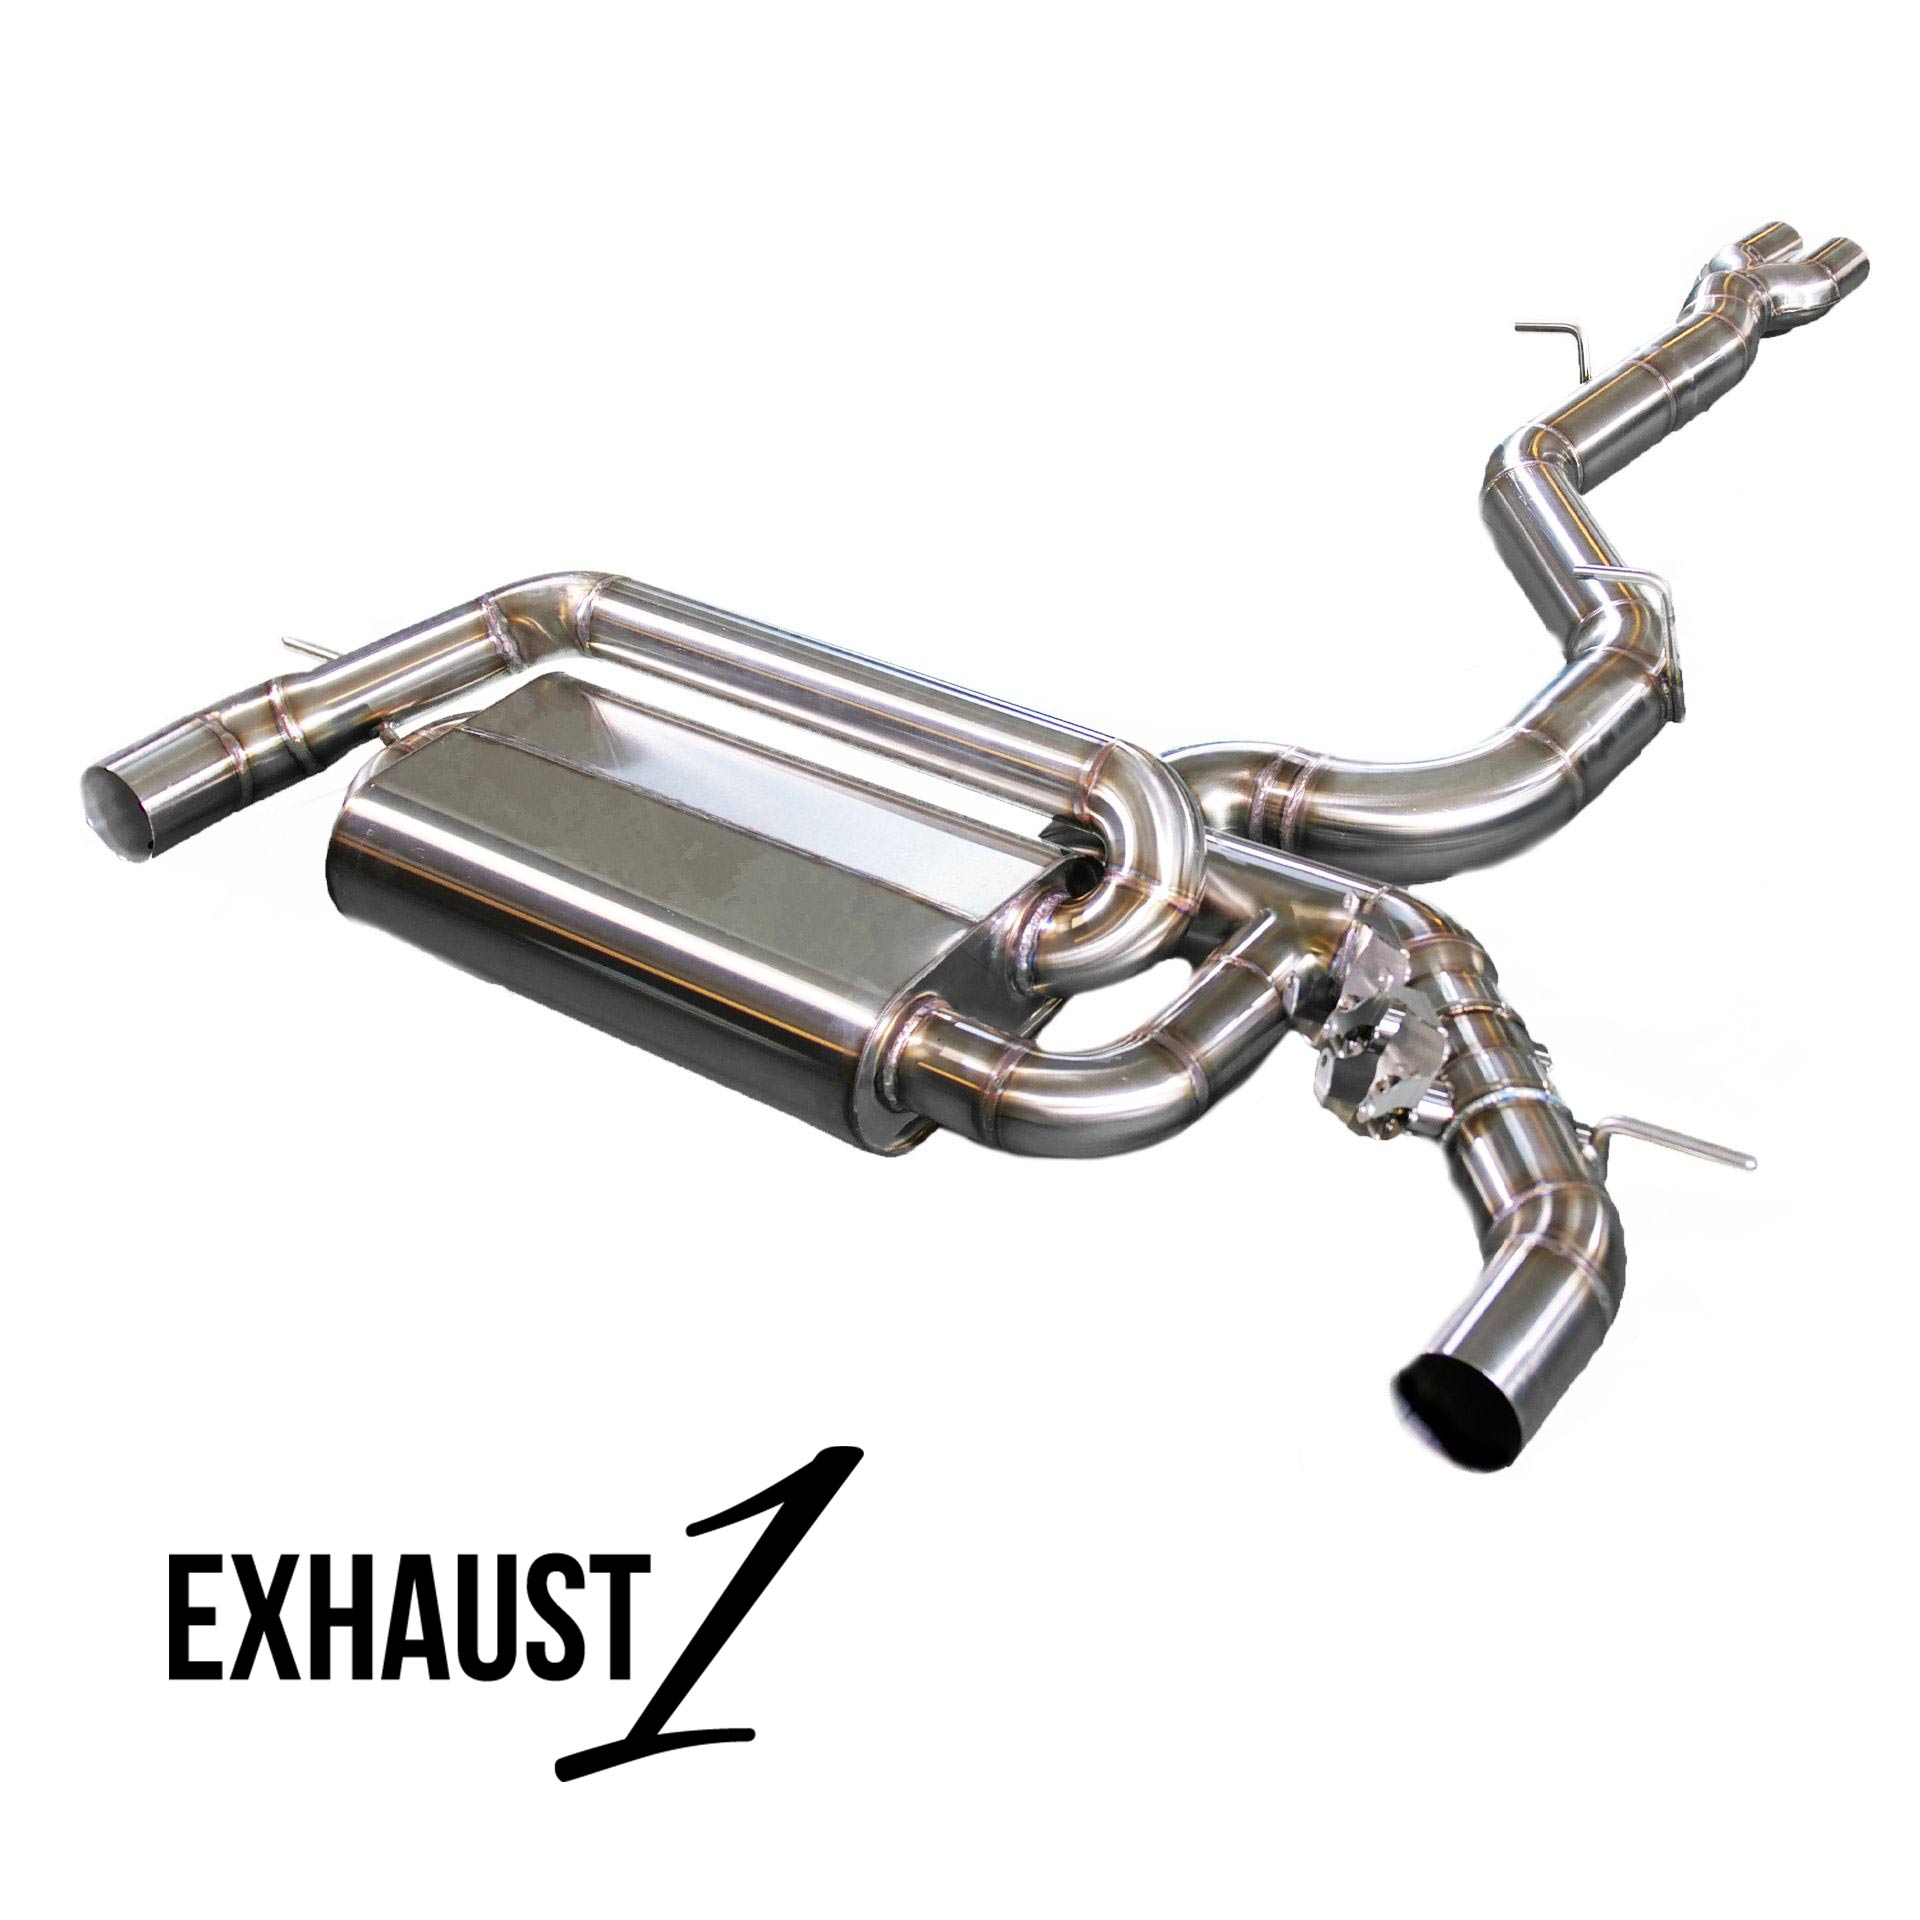 https://www.exhaust.one/media/images/org/Audi_RS3_8V_FL_OPF_Limo_Sportabgasanlage-mit-Klappenauspuff-by-Exhaust-one.jpg